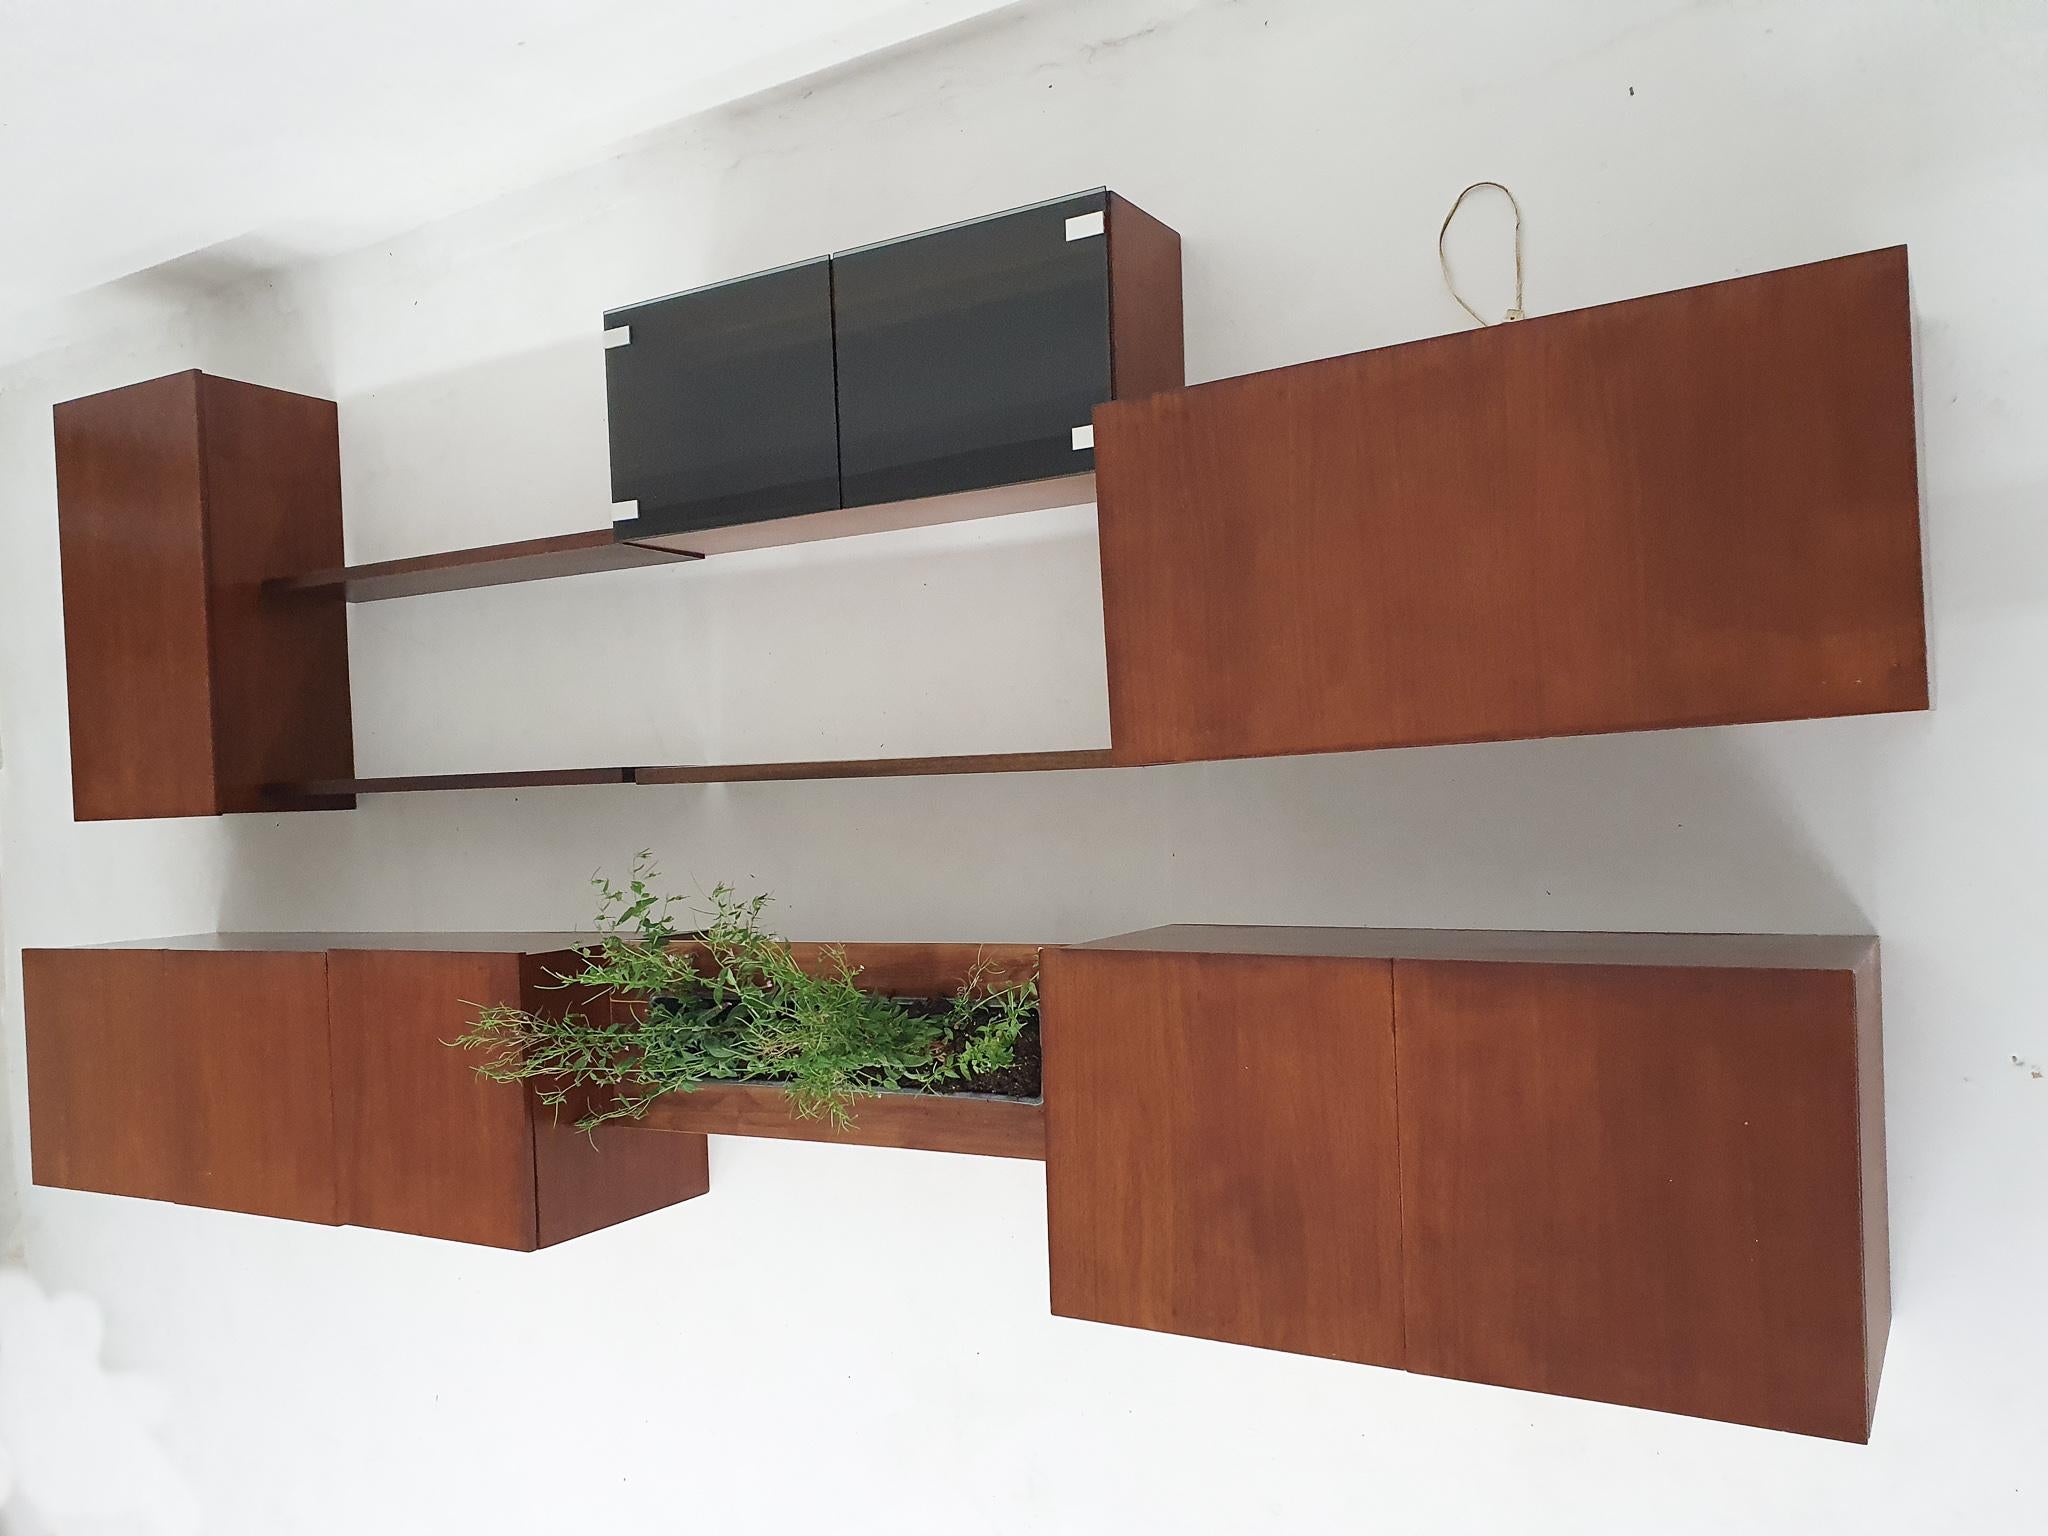 Teak Floating wall unit by Banz Bord, The Netherlands, 1970's For Sale